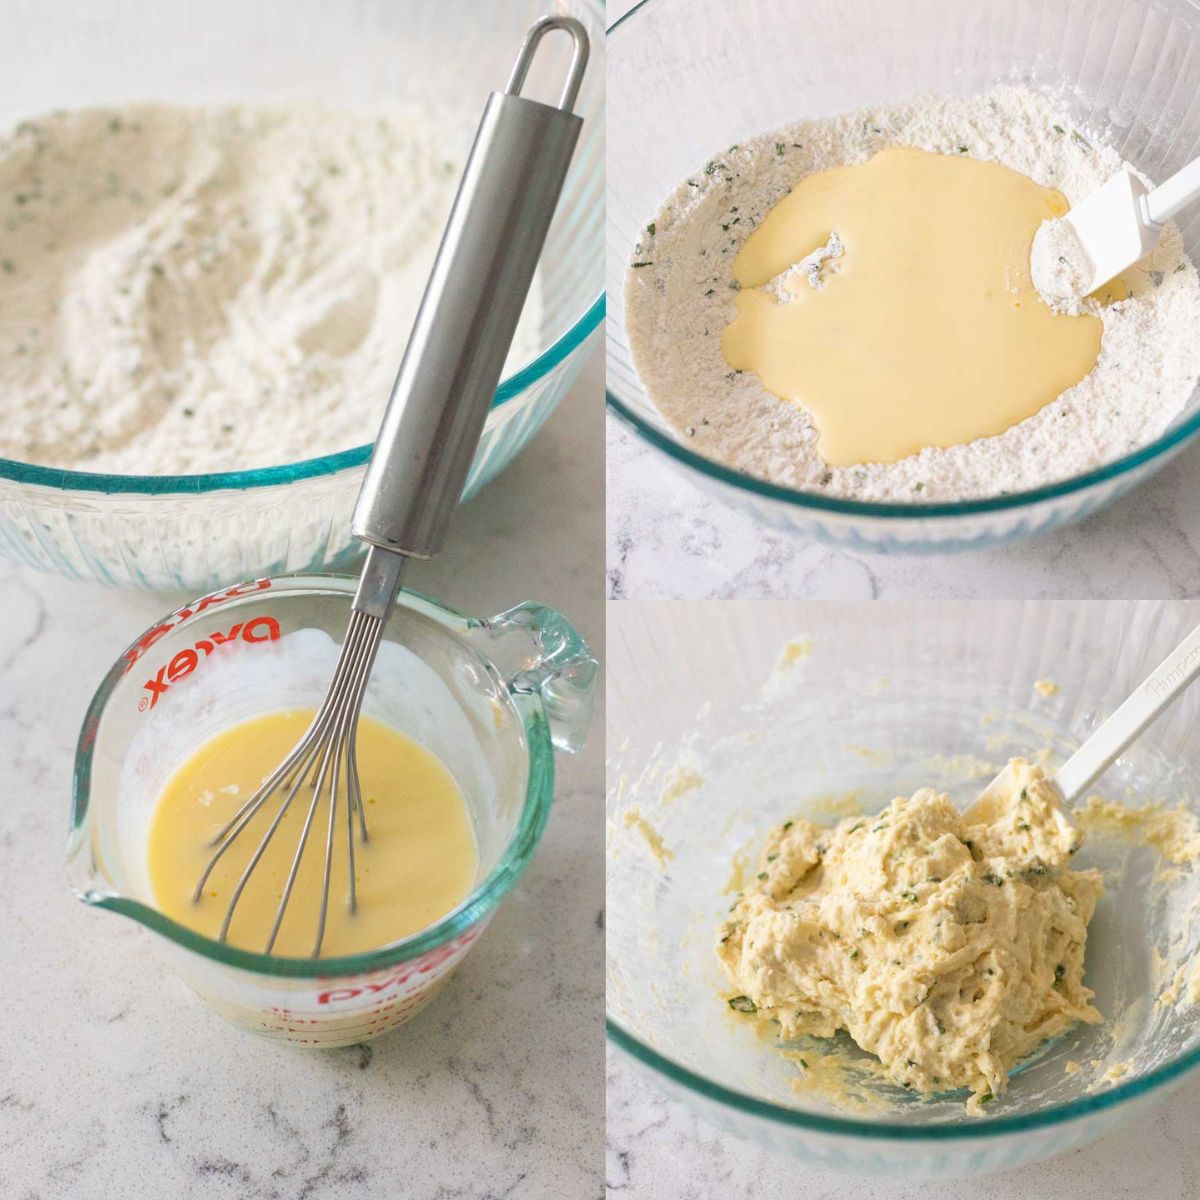 The step by step photos show how to mix up the dumpling dough.